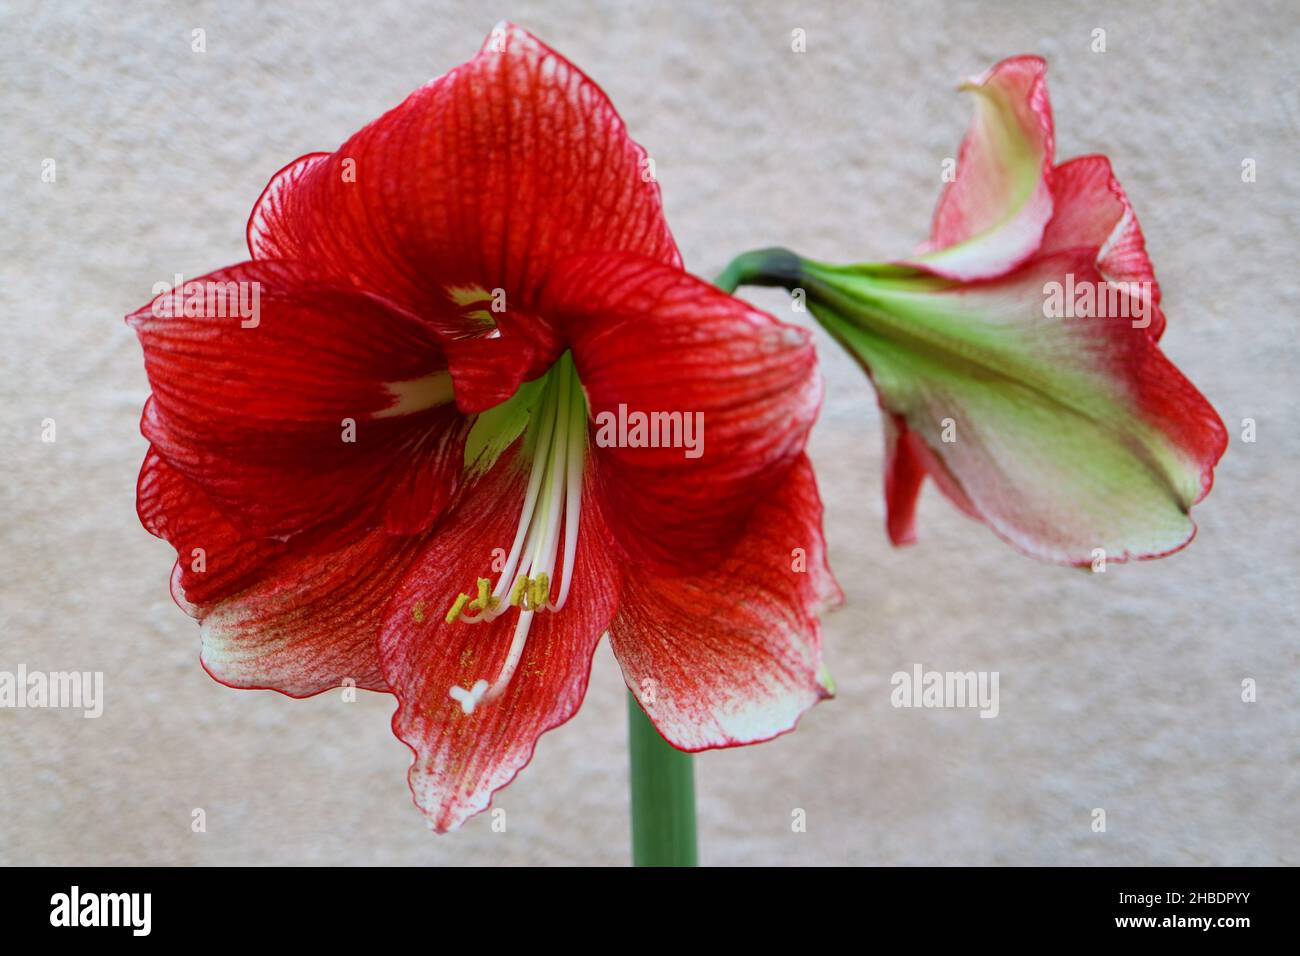 Red Amaryllis with long white stamens , red amaryllis with wall background, red flowers macro,  beauty in nature, floral photo, macro photography, Stock Photo